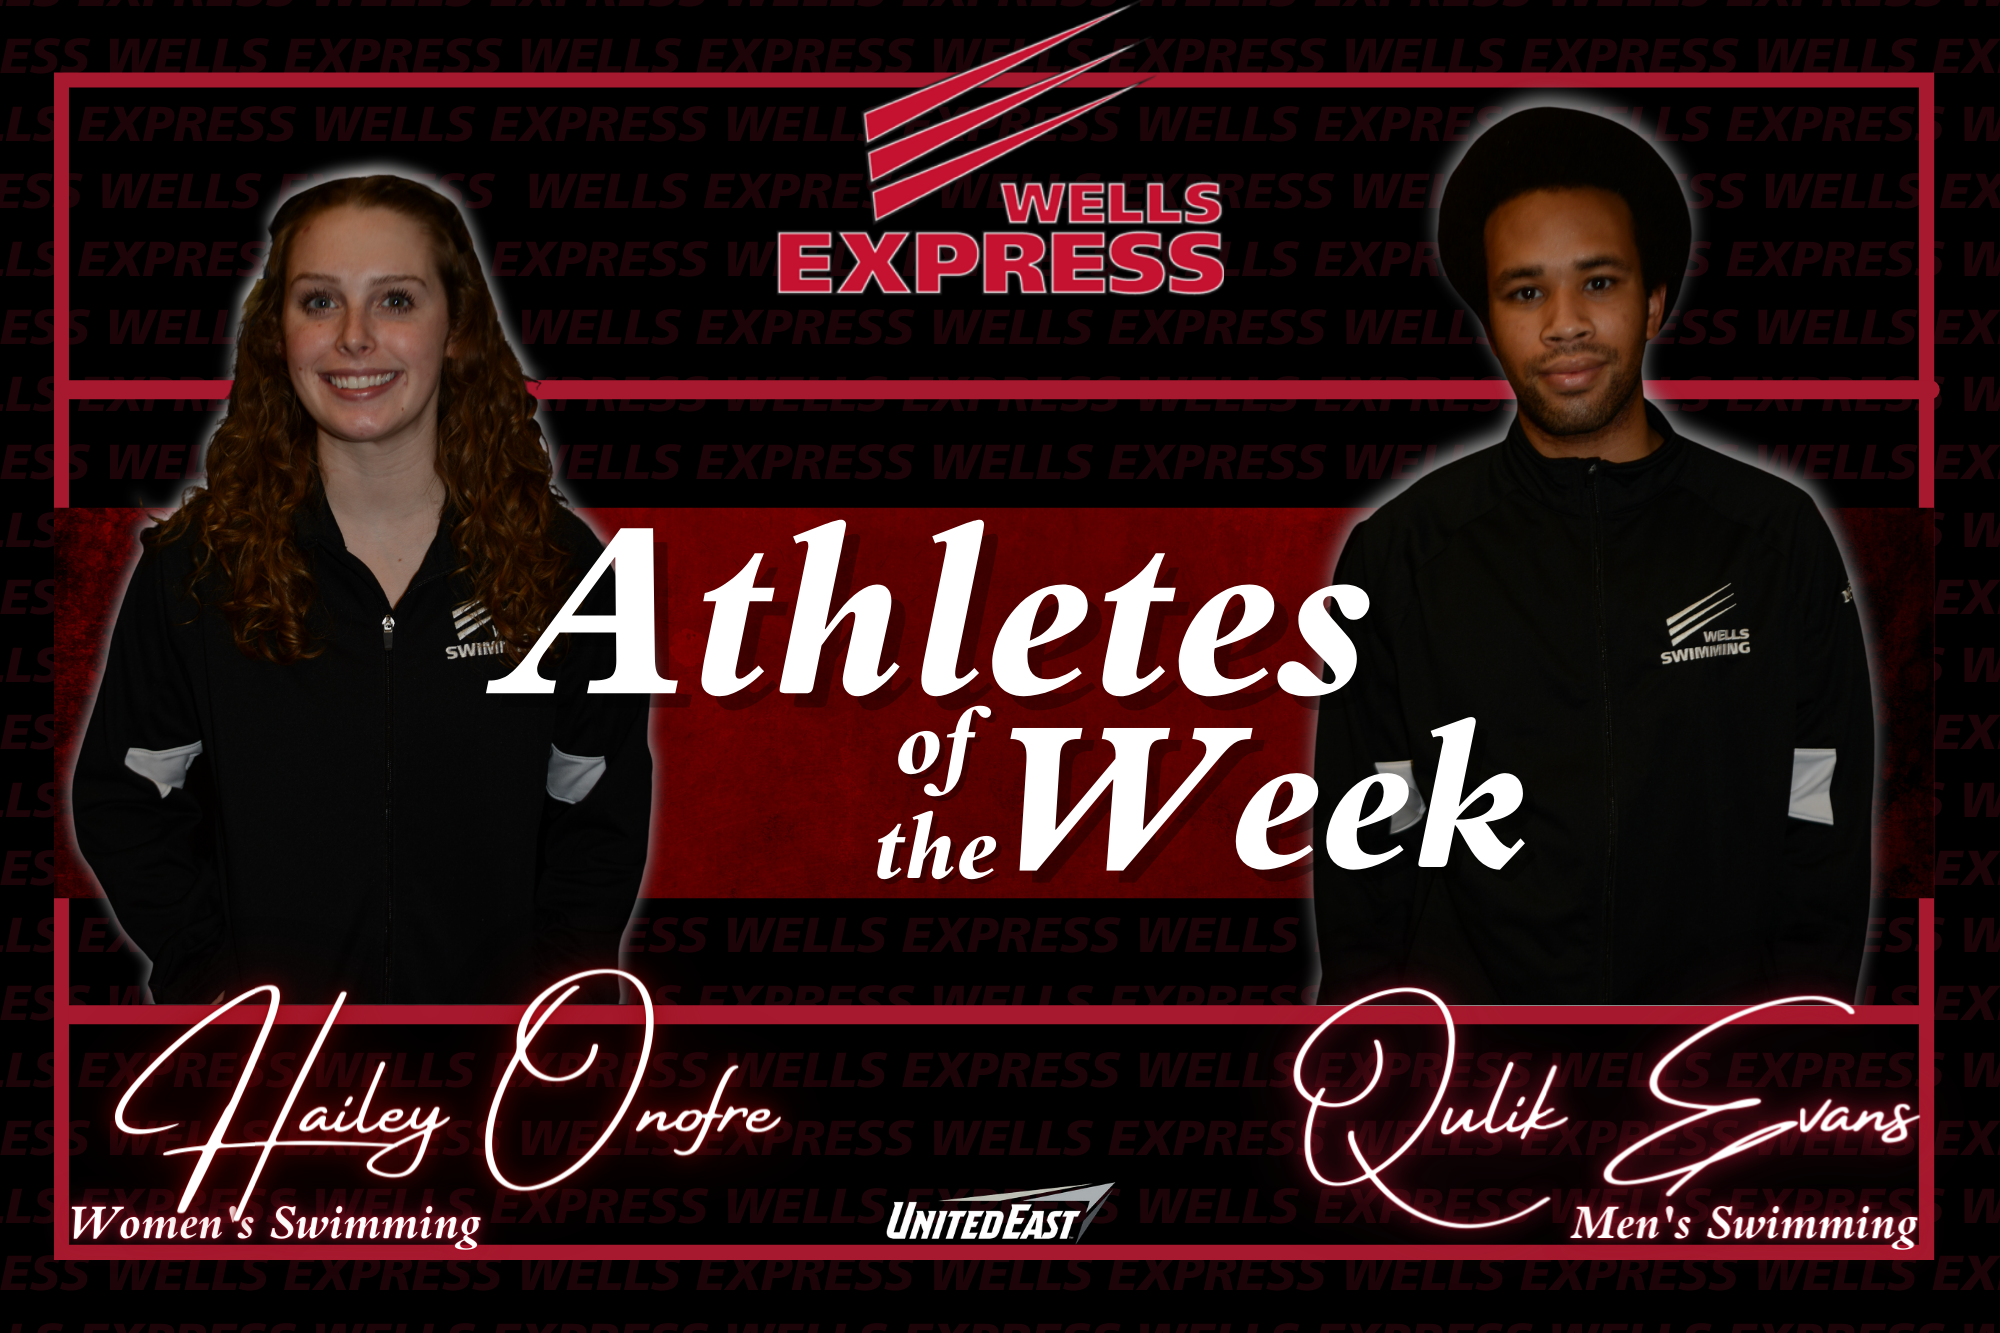 Wells Express Athletes of The Week 12/8